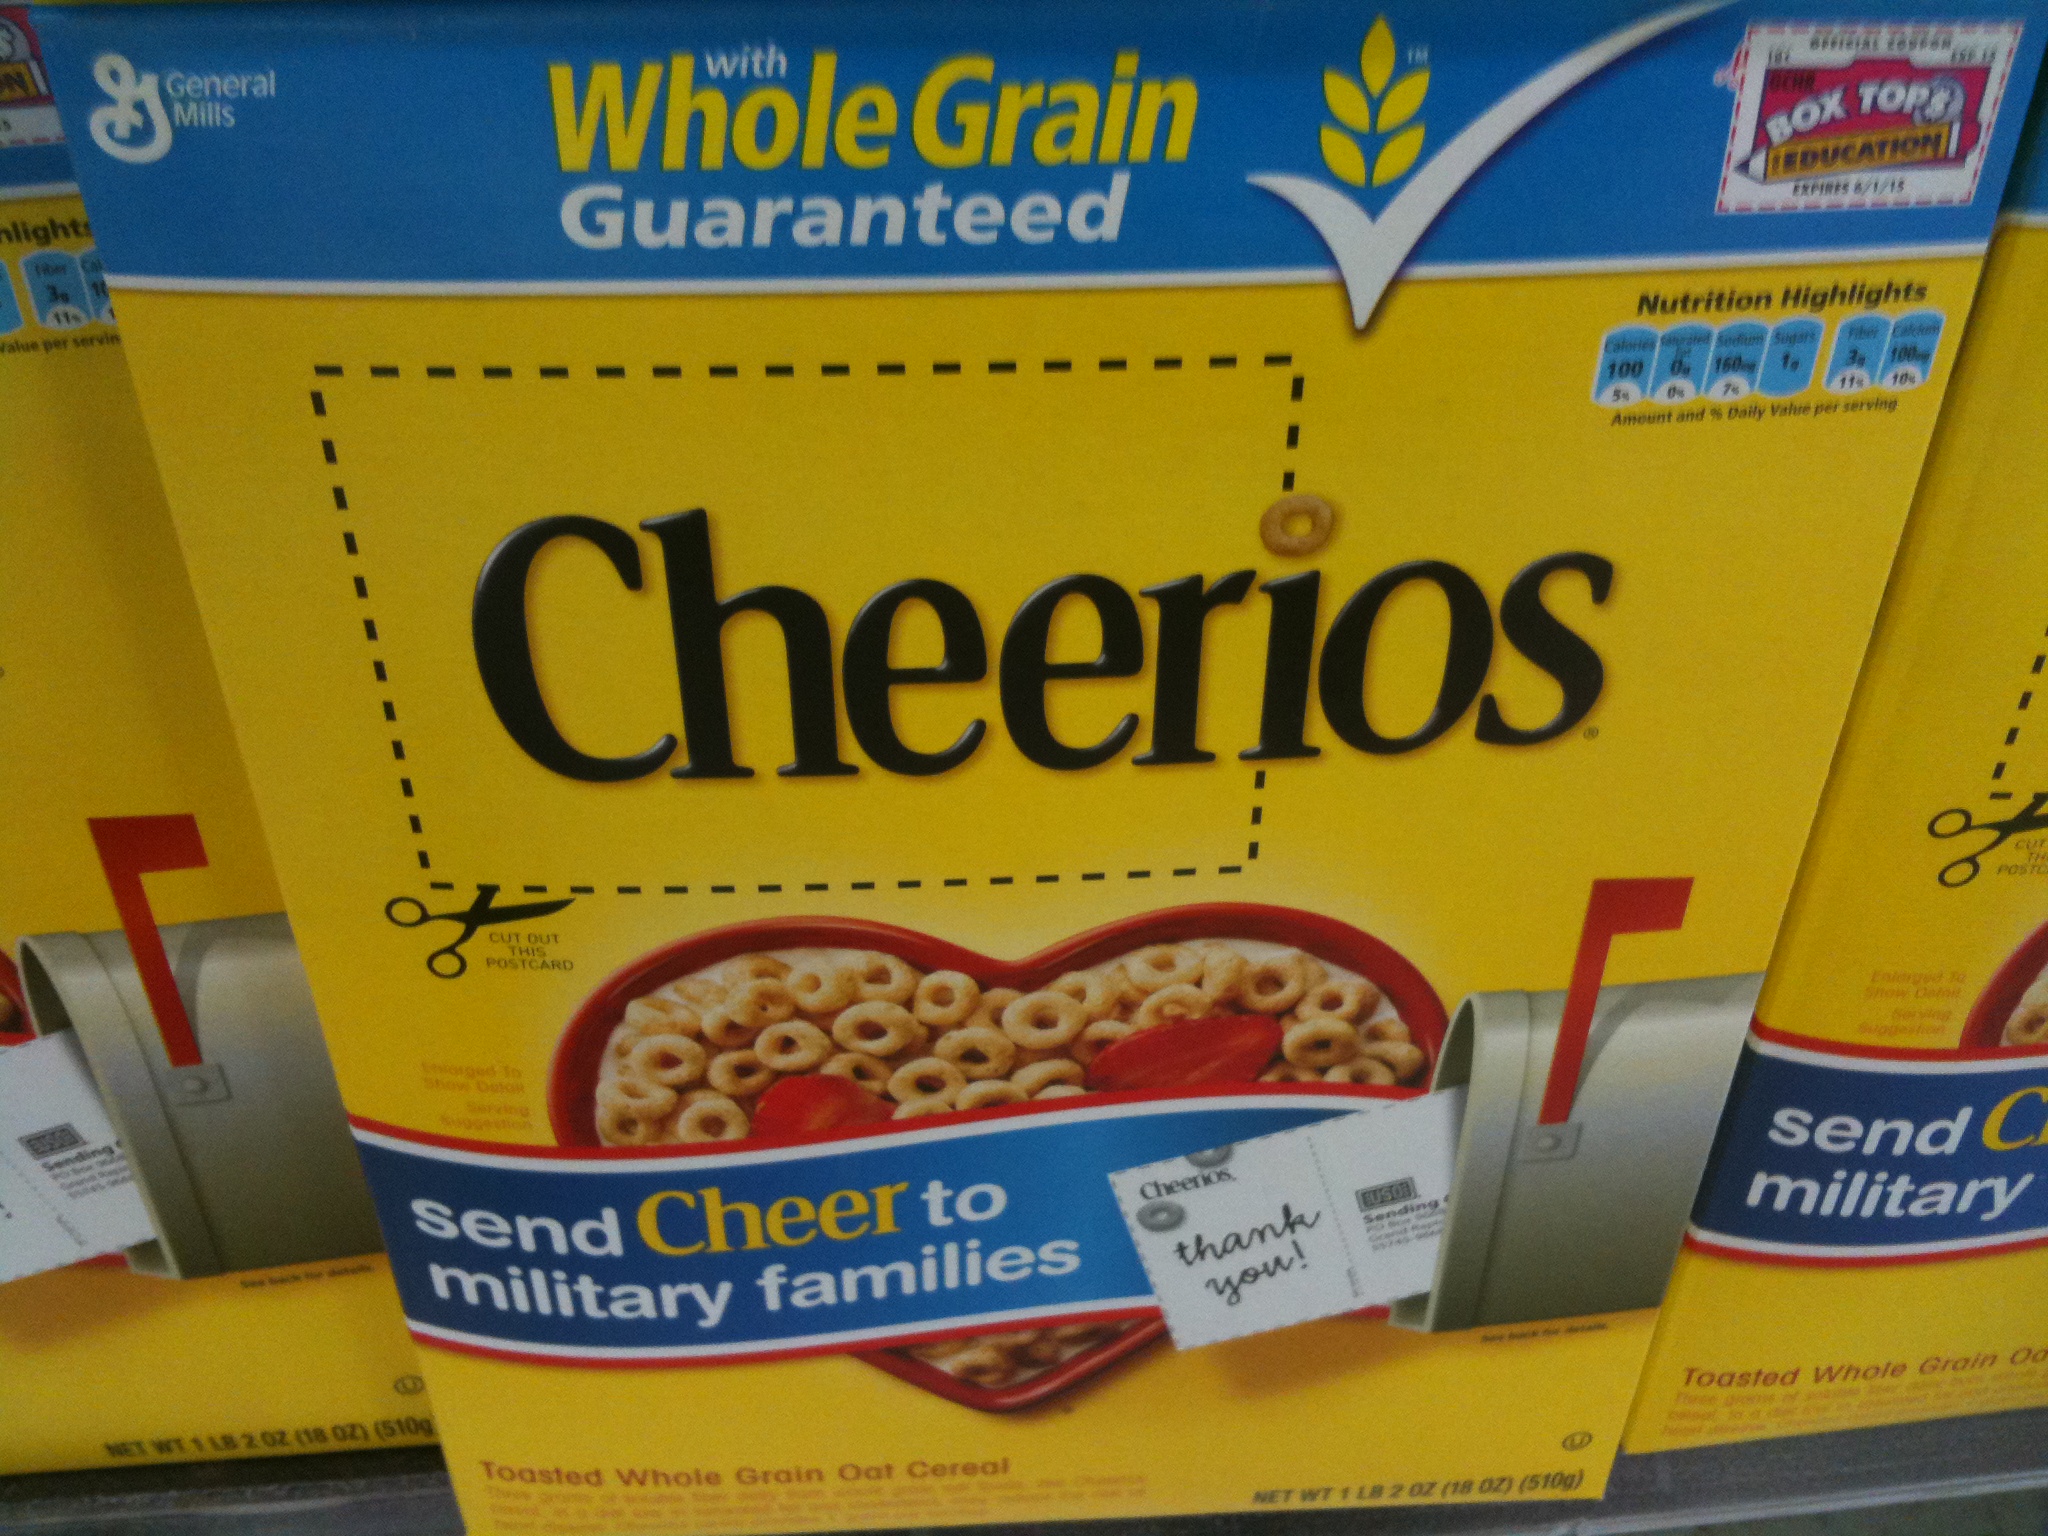 some packages of cheerios cereal are on sale